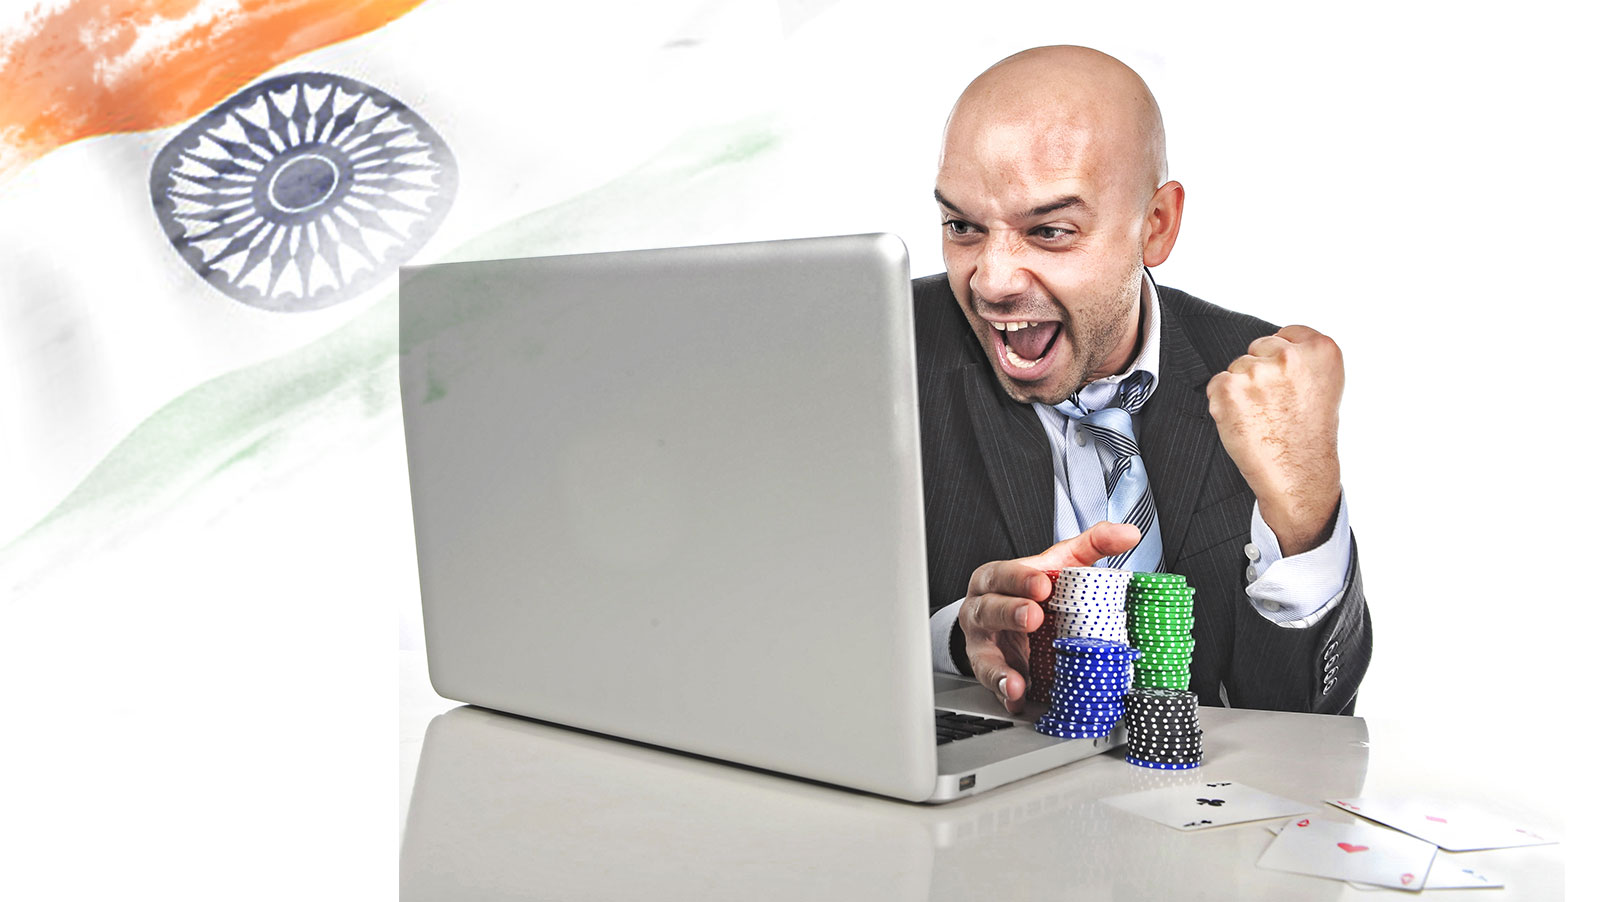 PokerStars set to launch poker site in India